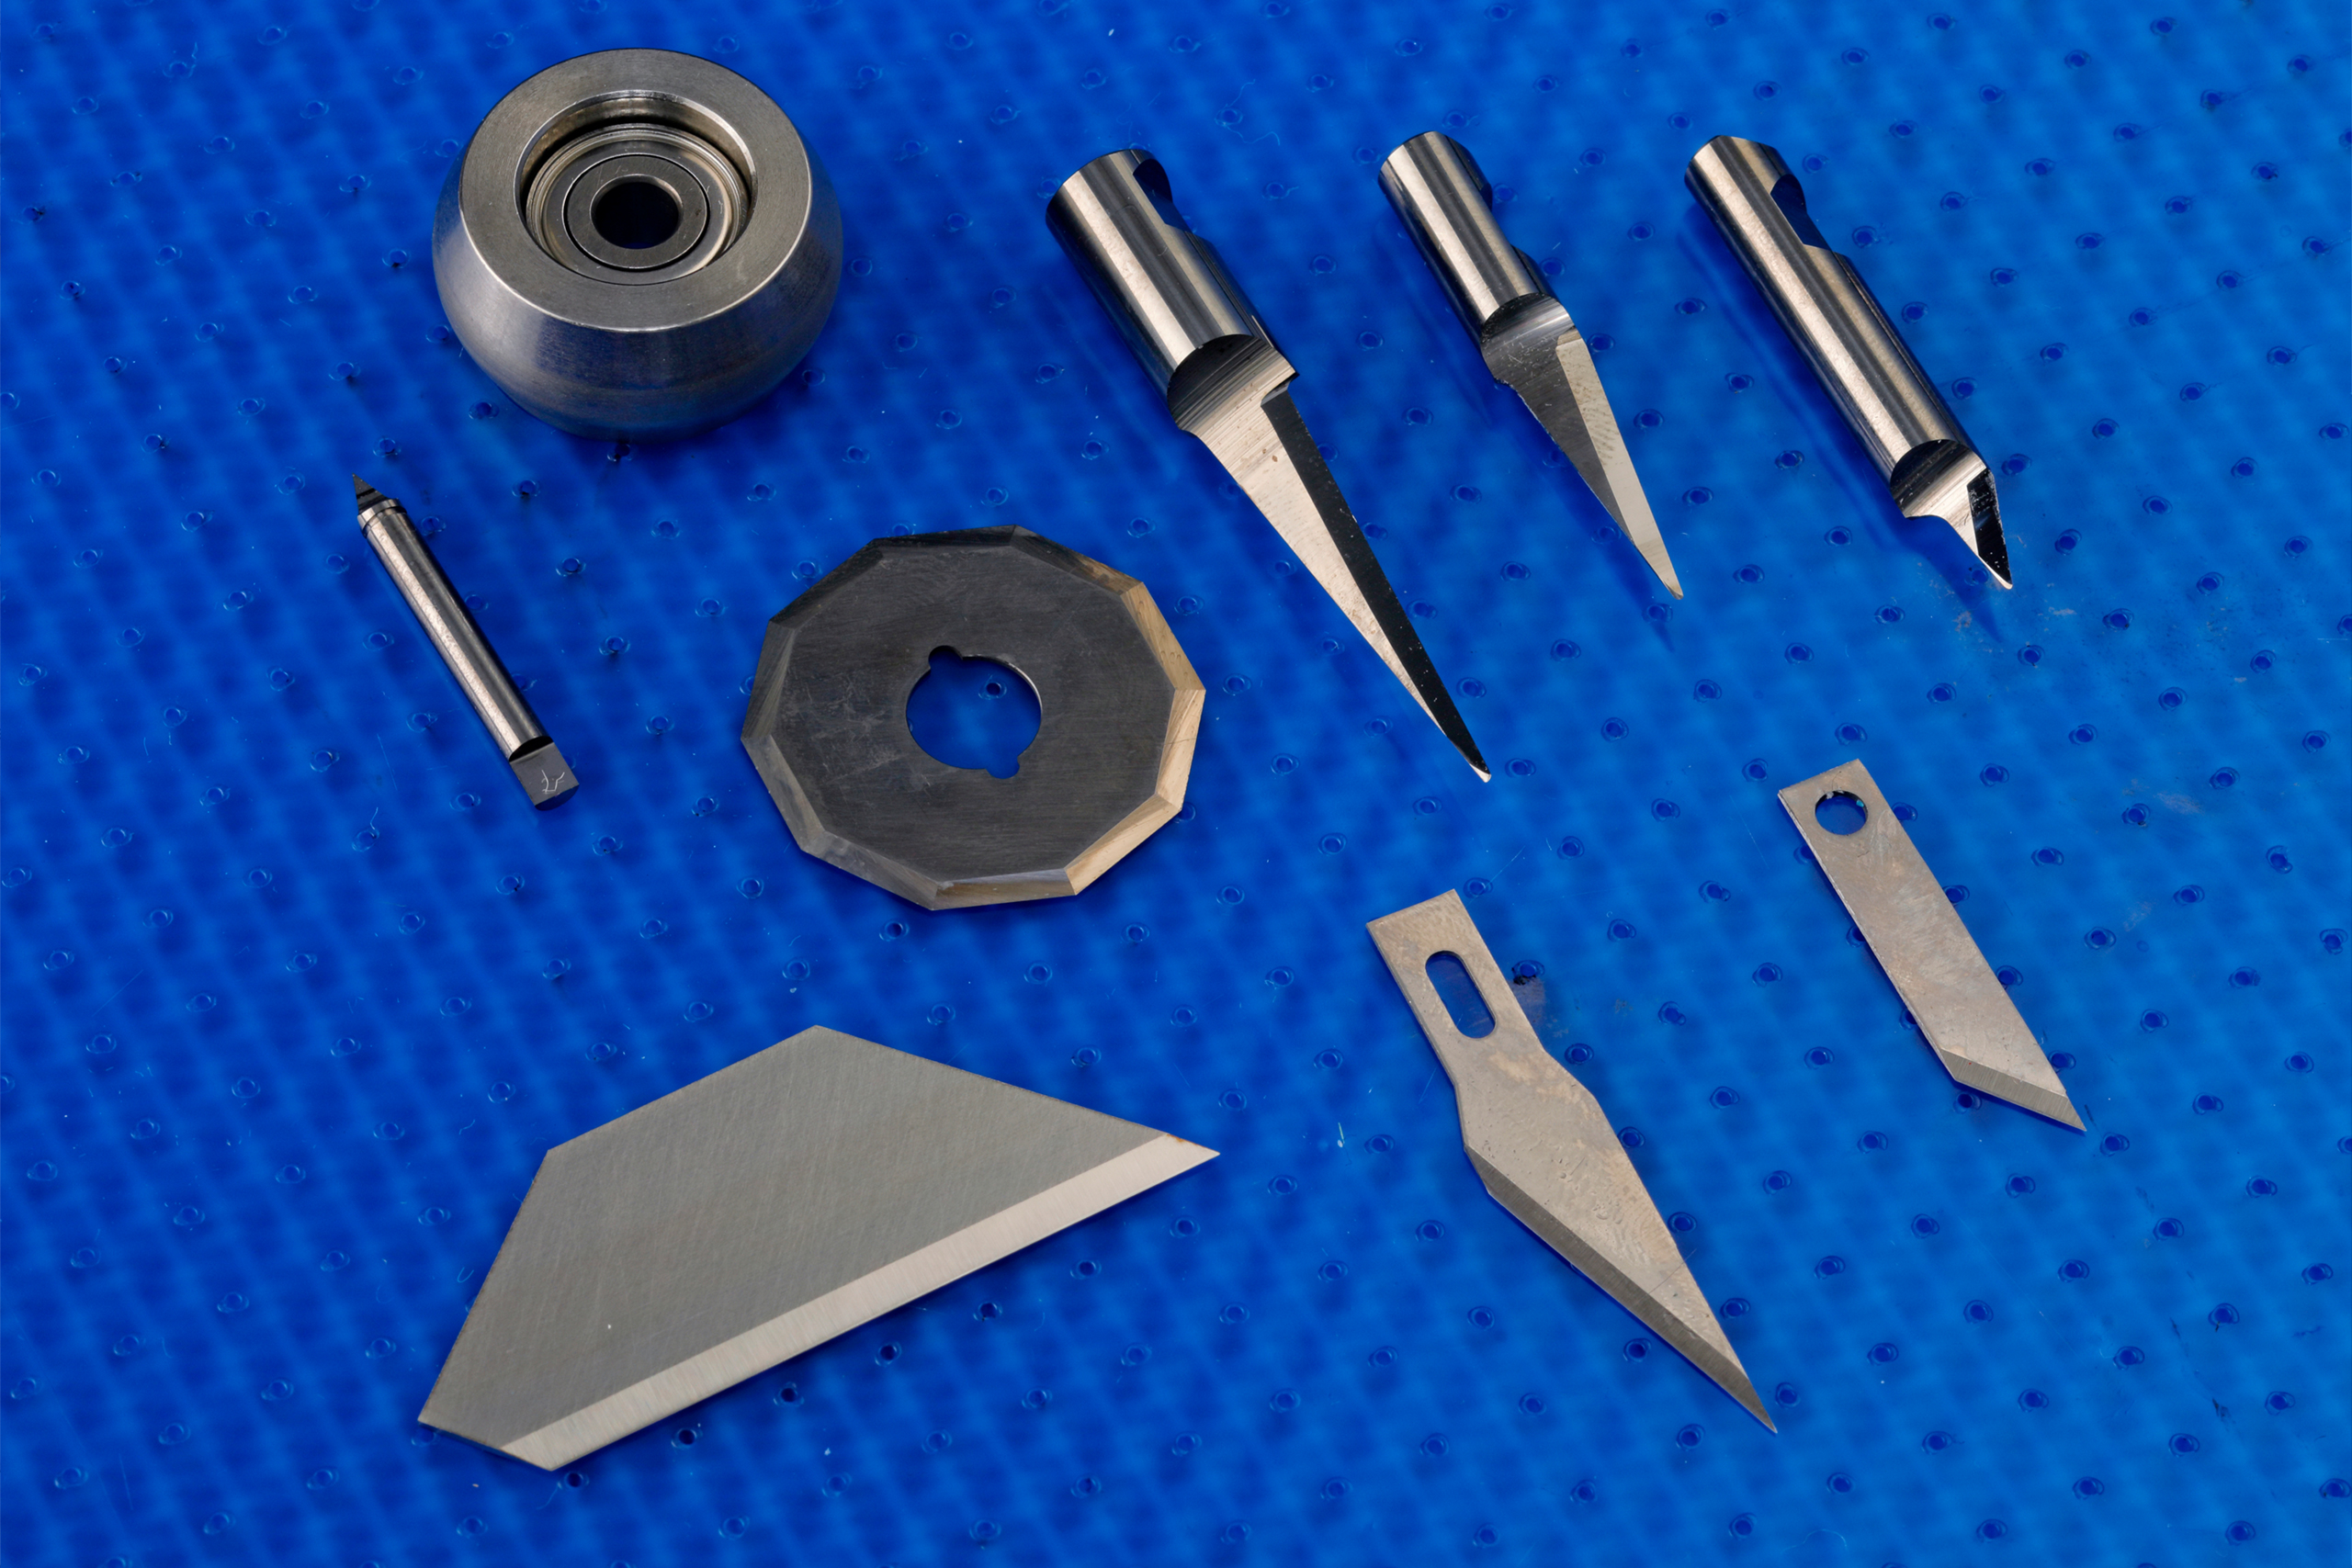 Available precision tools for Hawk Automated Precision Cutting System